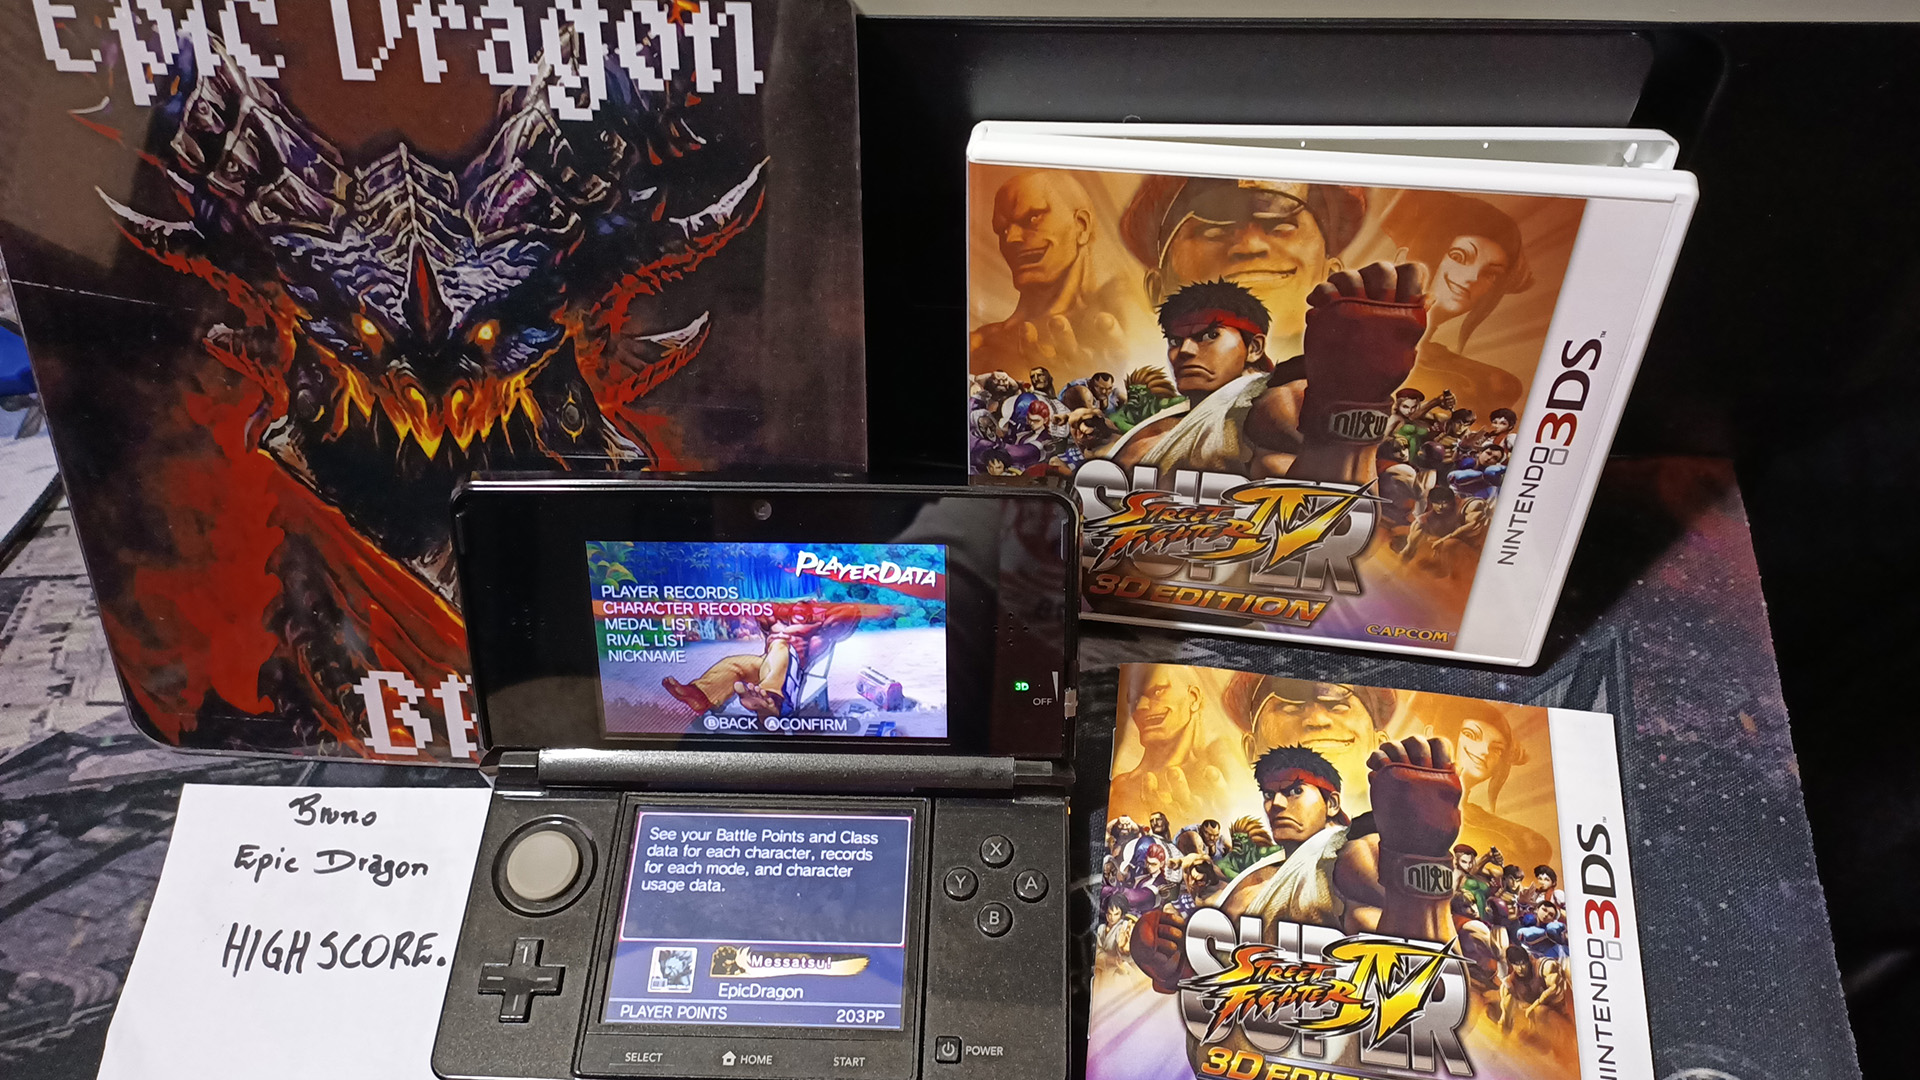 EpicDragon: Super Street Fighter IV 3D Edition: Challenge: Car Crusher: Hakan (Nintendo 3DS) 90,100 points on 2022-07-29 16:28:01